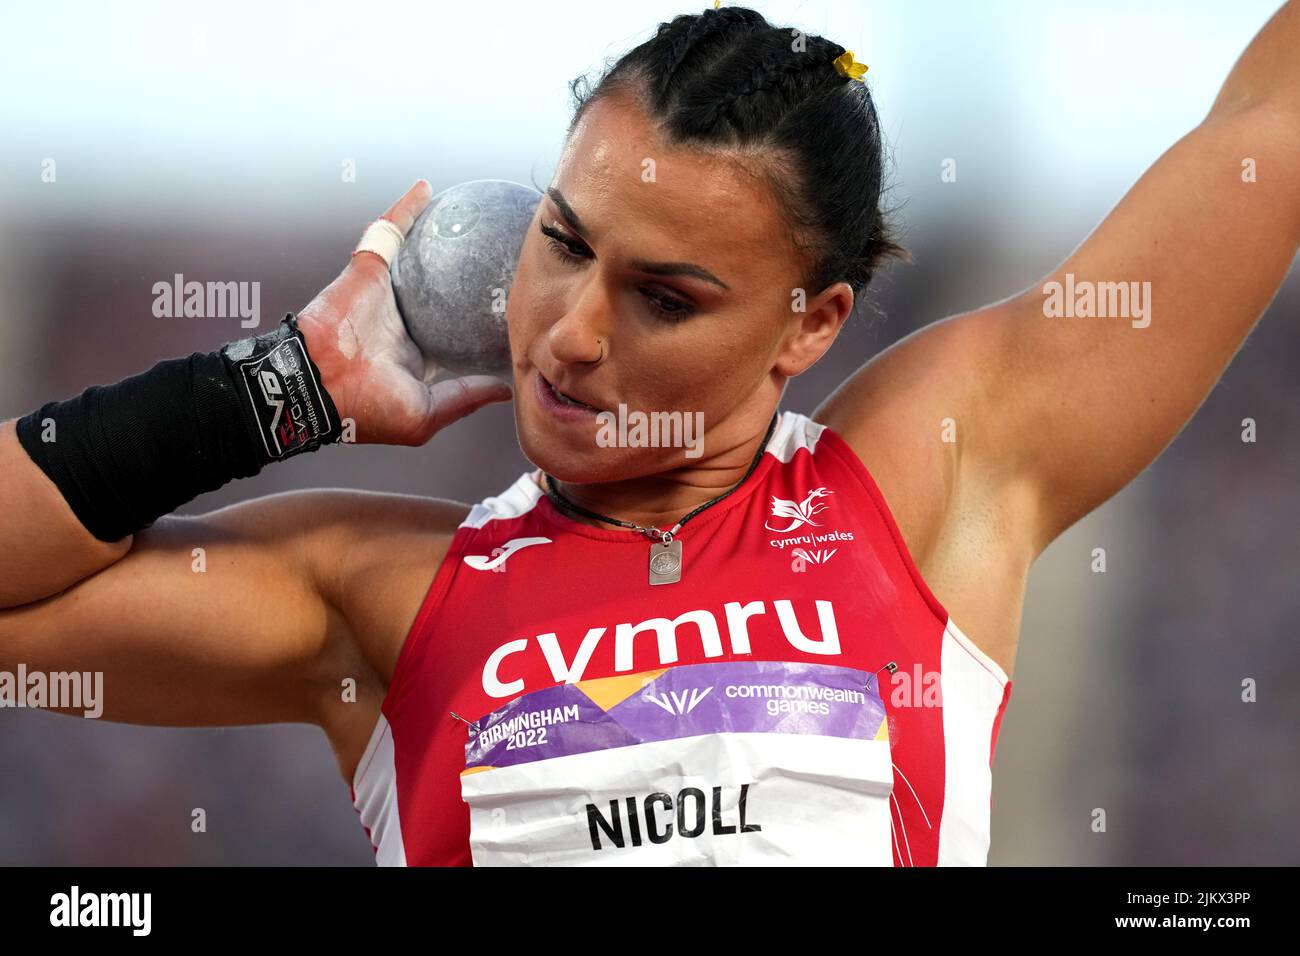 Wales’ Adele Nicoll in action during the Women’s Shot Put - Final at Alexander Stadium on day six of the 2022 Commonwealth Games in Birmingham. Picture date: Wednesday August 3, 2022. Stock Photo